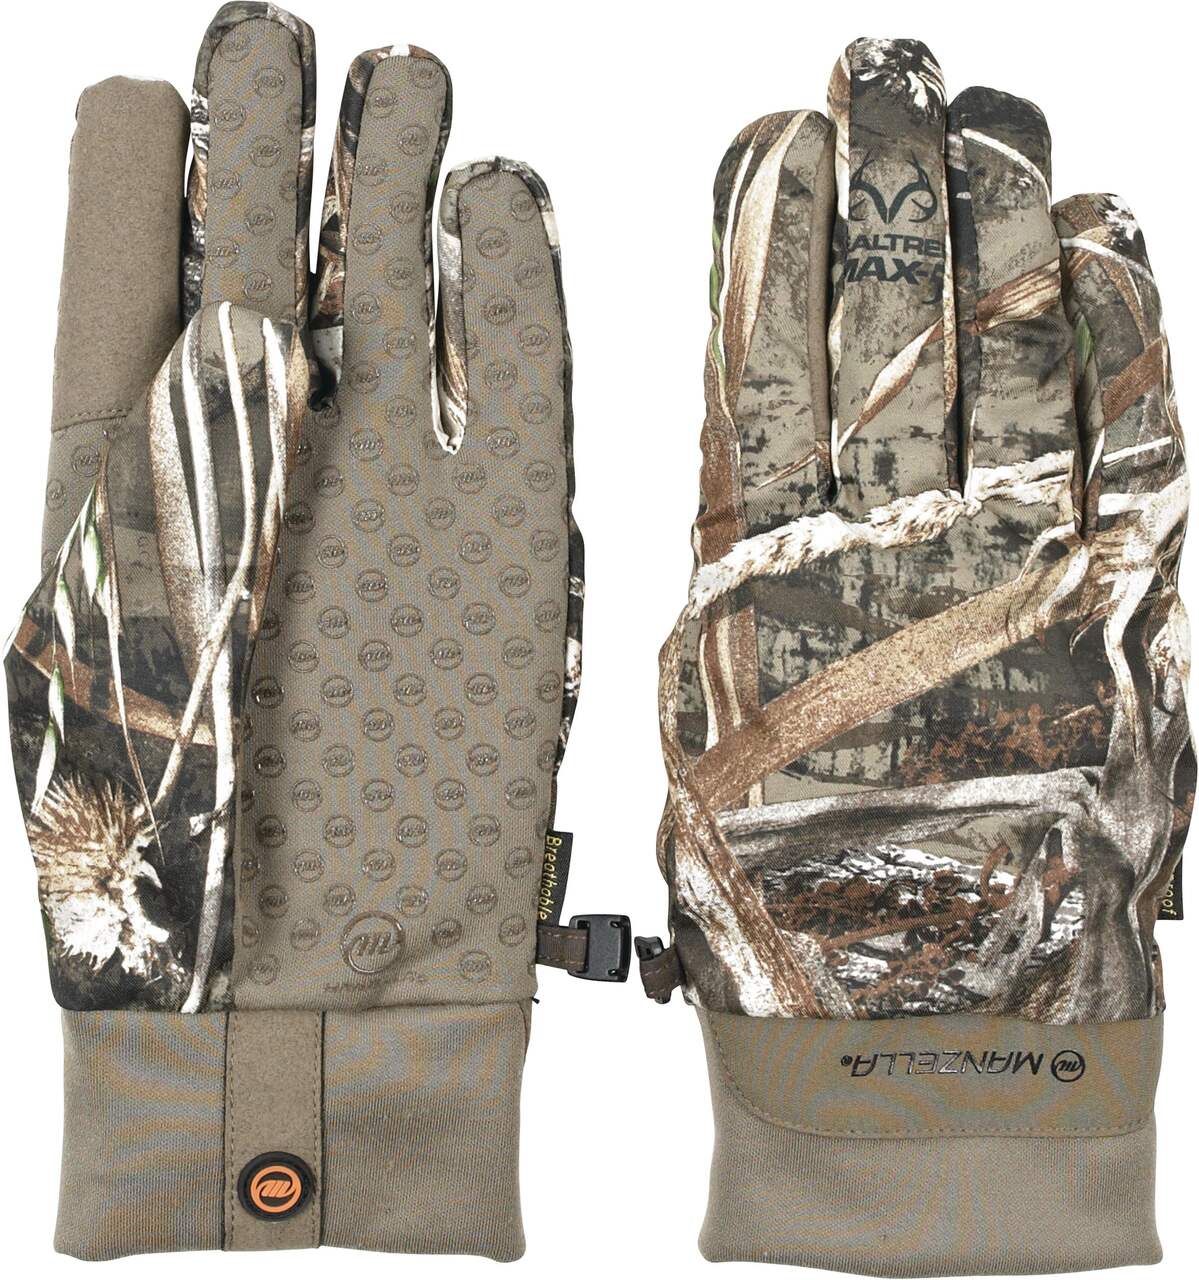 https://media-www.canadiantire.ca/product/playing/hunting/hunting-apparel-footwear/1754355/manzella-waterfowl-shooter-gloves-l-a824048e-4510-46bd-bde3-88affcde3645-jpgrendition.jpg?imdensity=1&imwidth=640&impolicy=mZoom